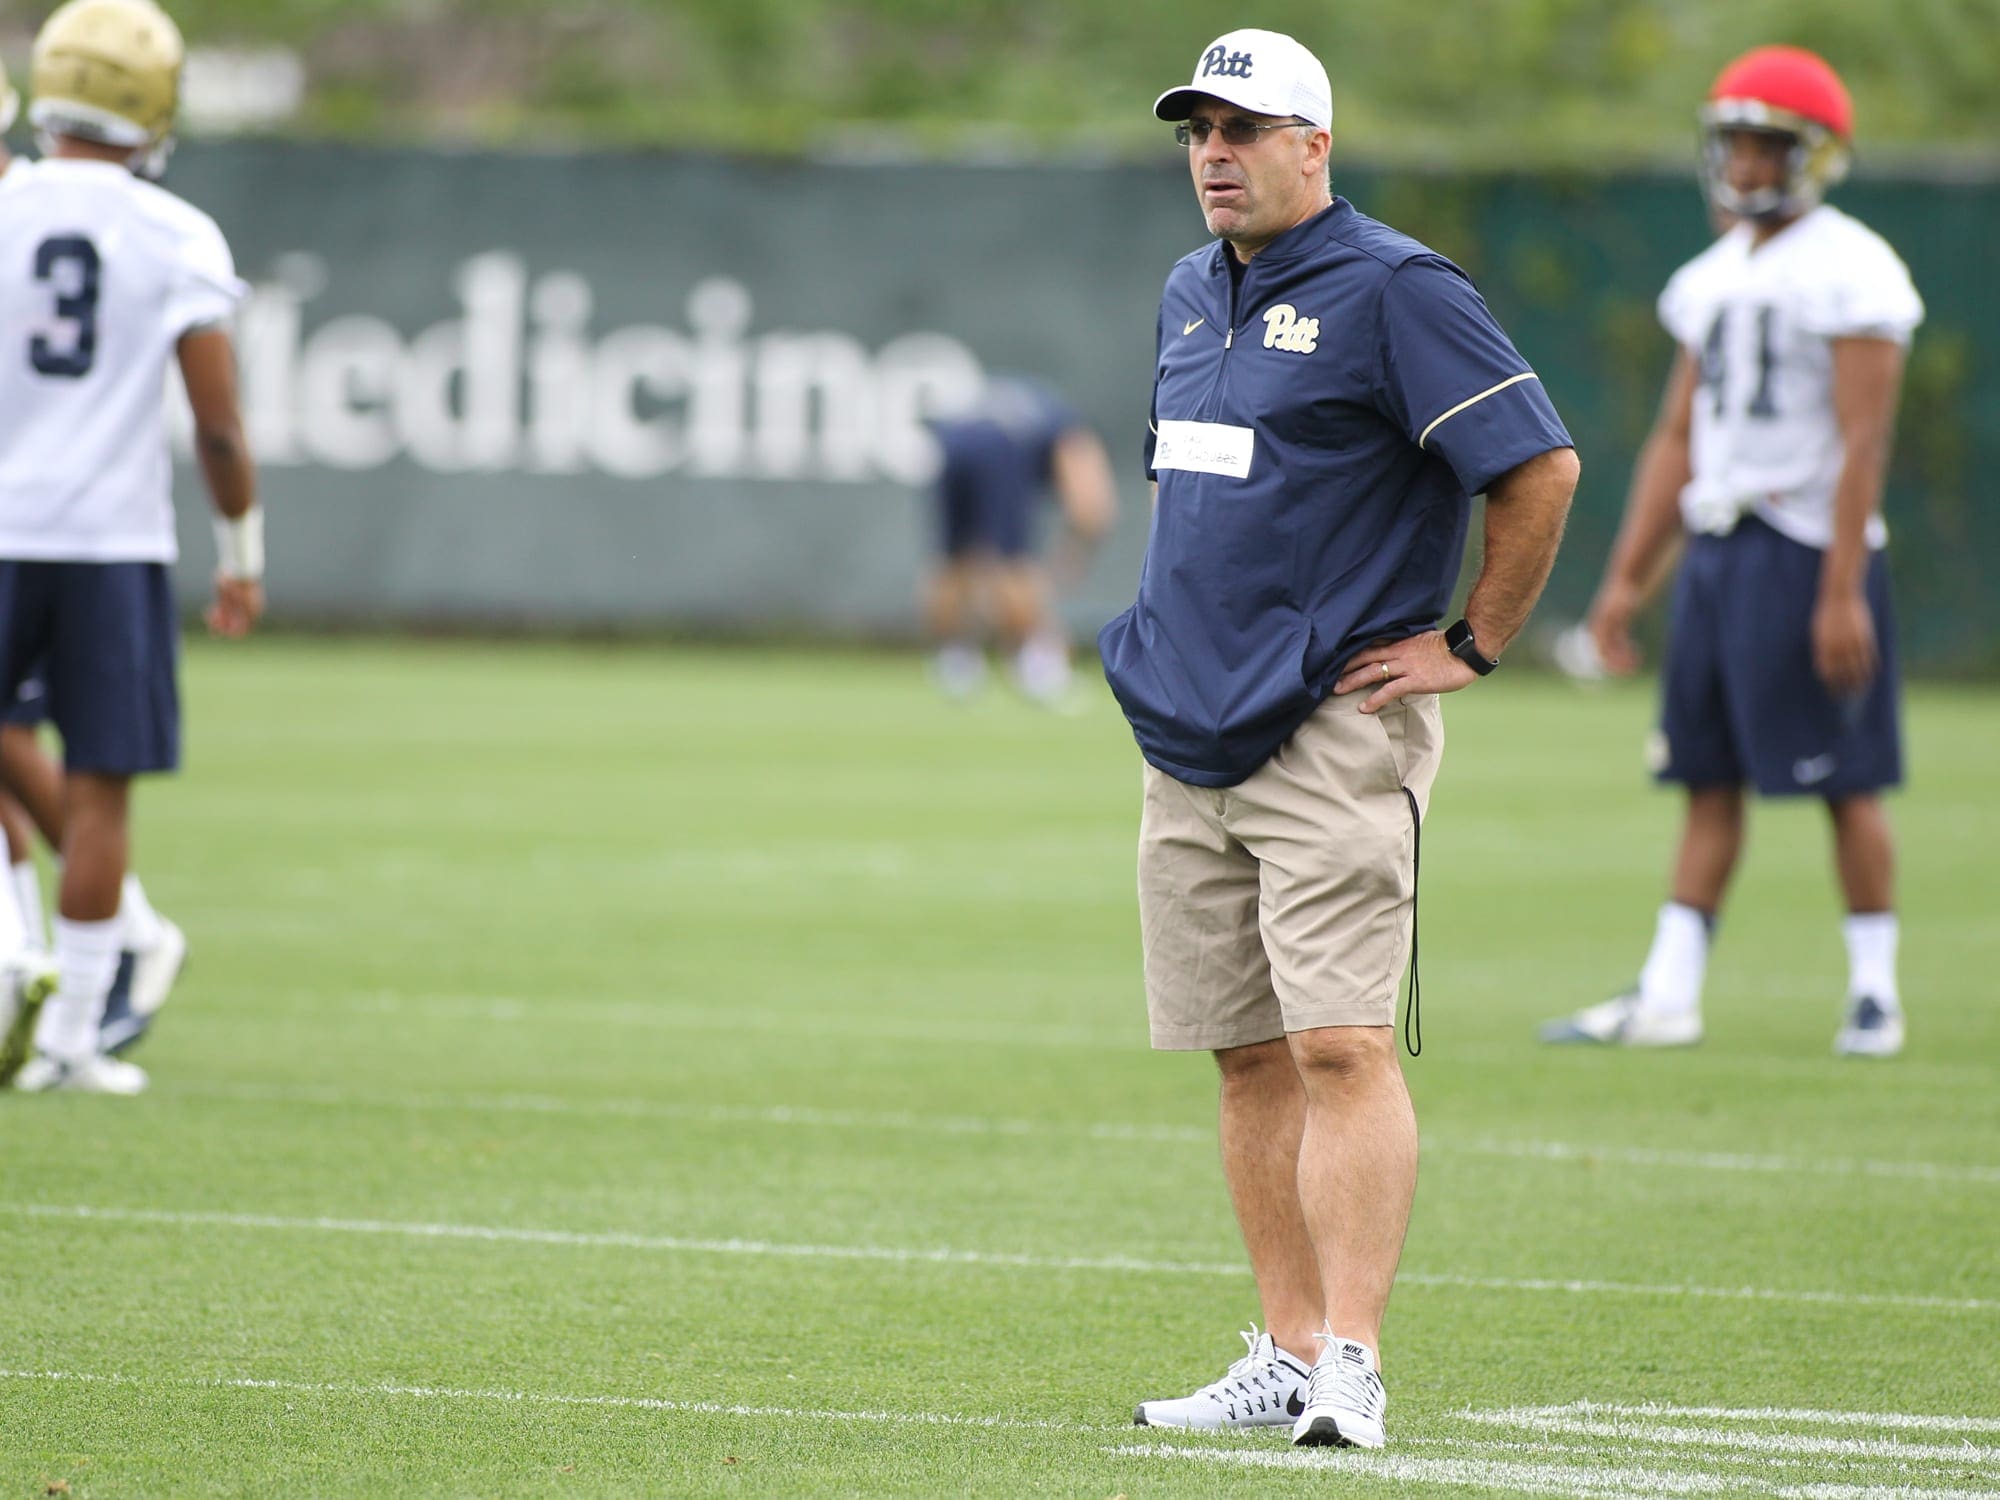 Coach Pat Narduzzi Looks on during the first practice of the season (Photo credit: David Hague)